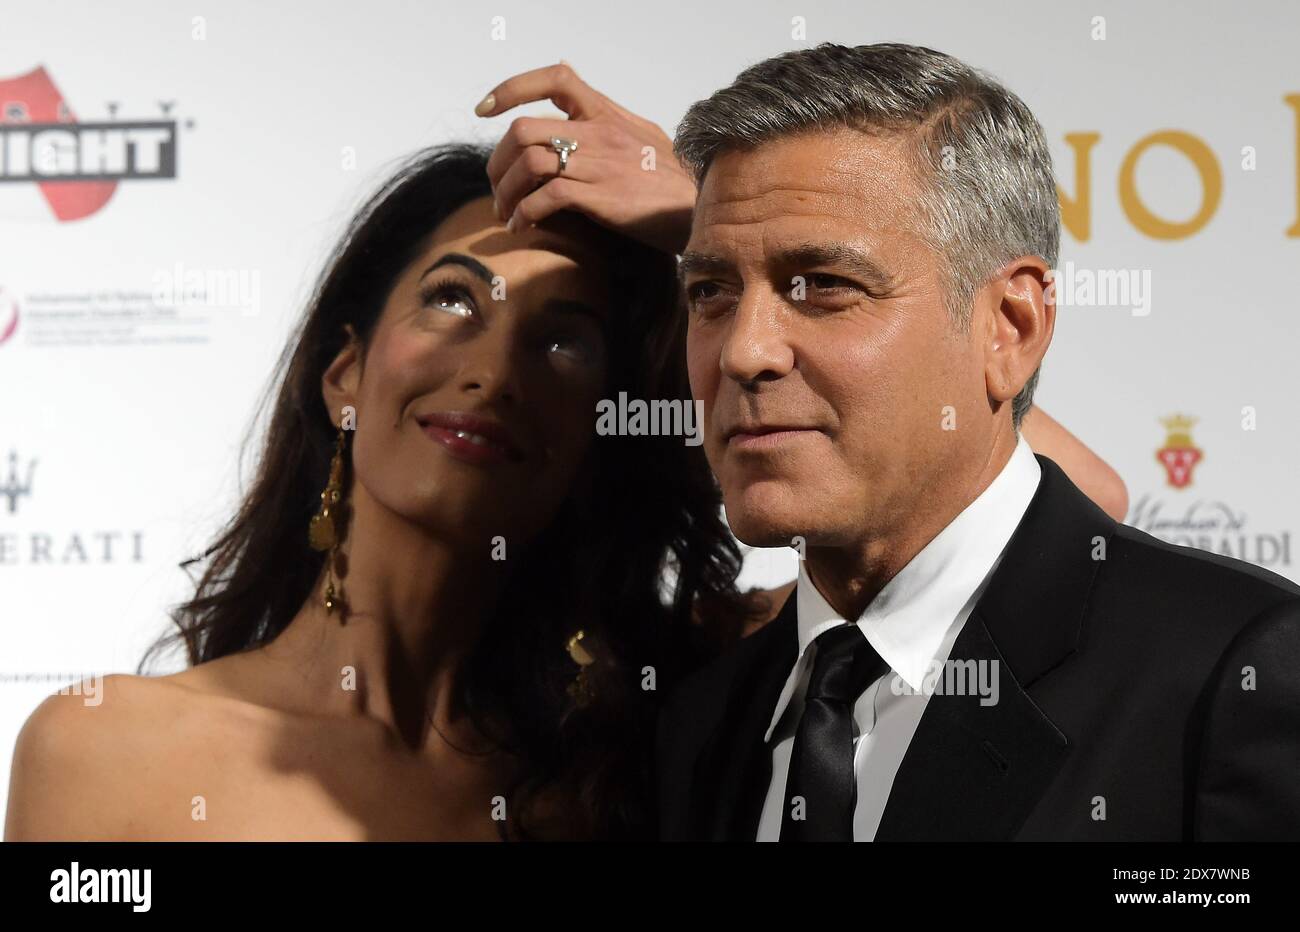 US actor-director George Clooney arrives with his fiancee, British-Lebanese human rights lawyer Amal Alamuddin for the Celebrity Fight Night at the Palazzo Vecchio in Florence, Italy, September 7, 2014. The charity event benefits the Andrea Bocelli Foundation and the Muhammad Ali Parkinson Center. Photo by Eric Vandeville/ABACAPRESS.COM Stock Photo